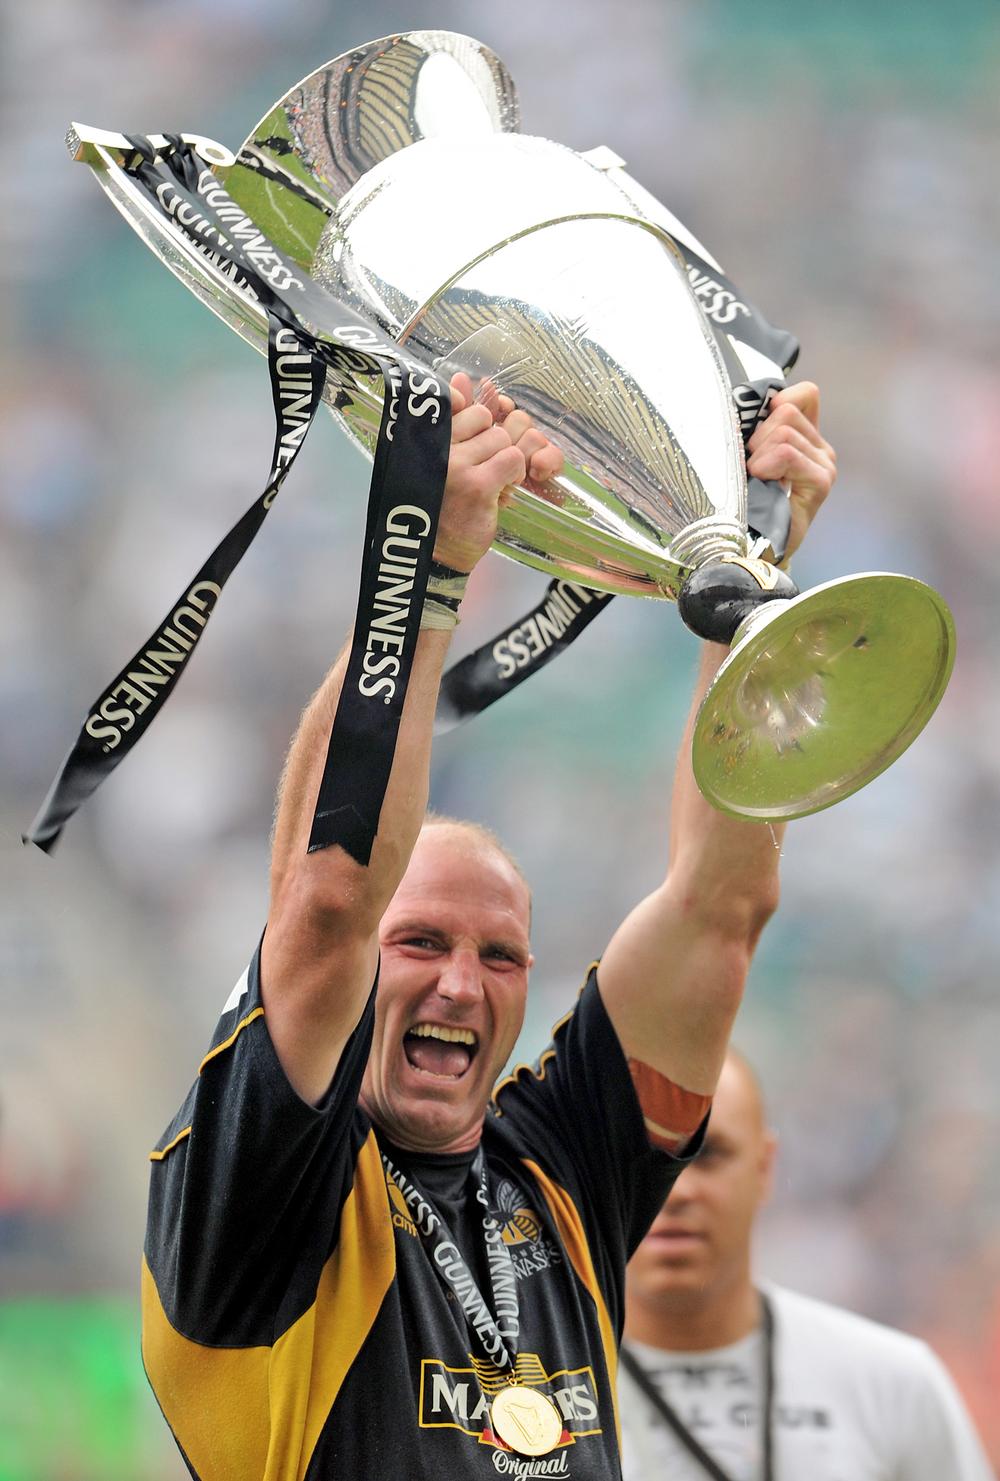 Dallaglio helped take the Wasps to victory in the Guinness Premiership in 2008 / © Joe Giddens/EMPICS Sport